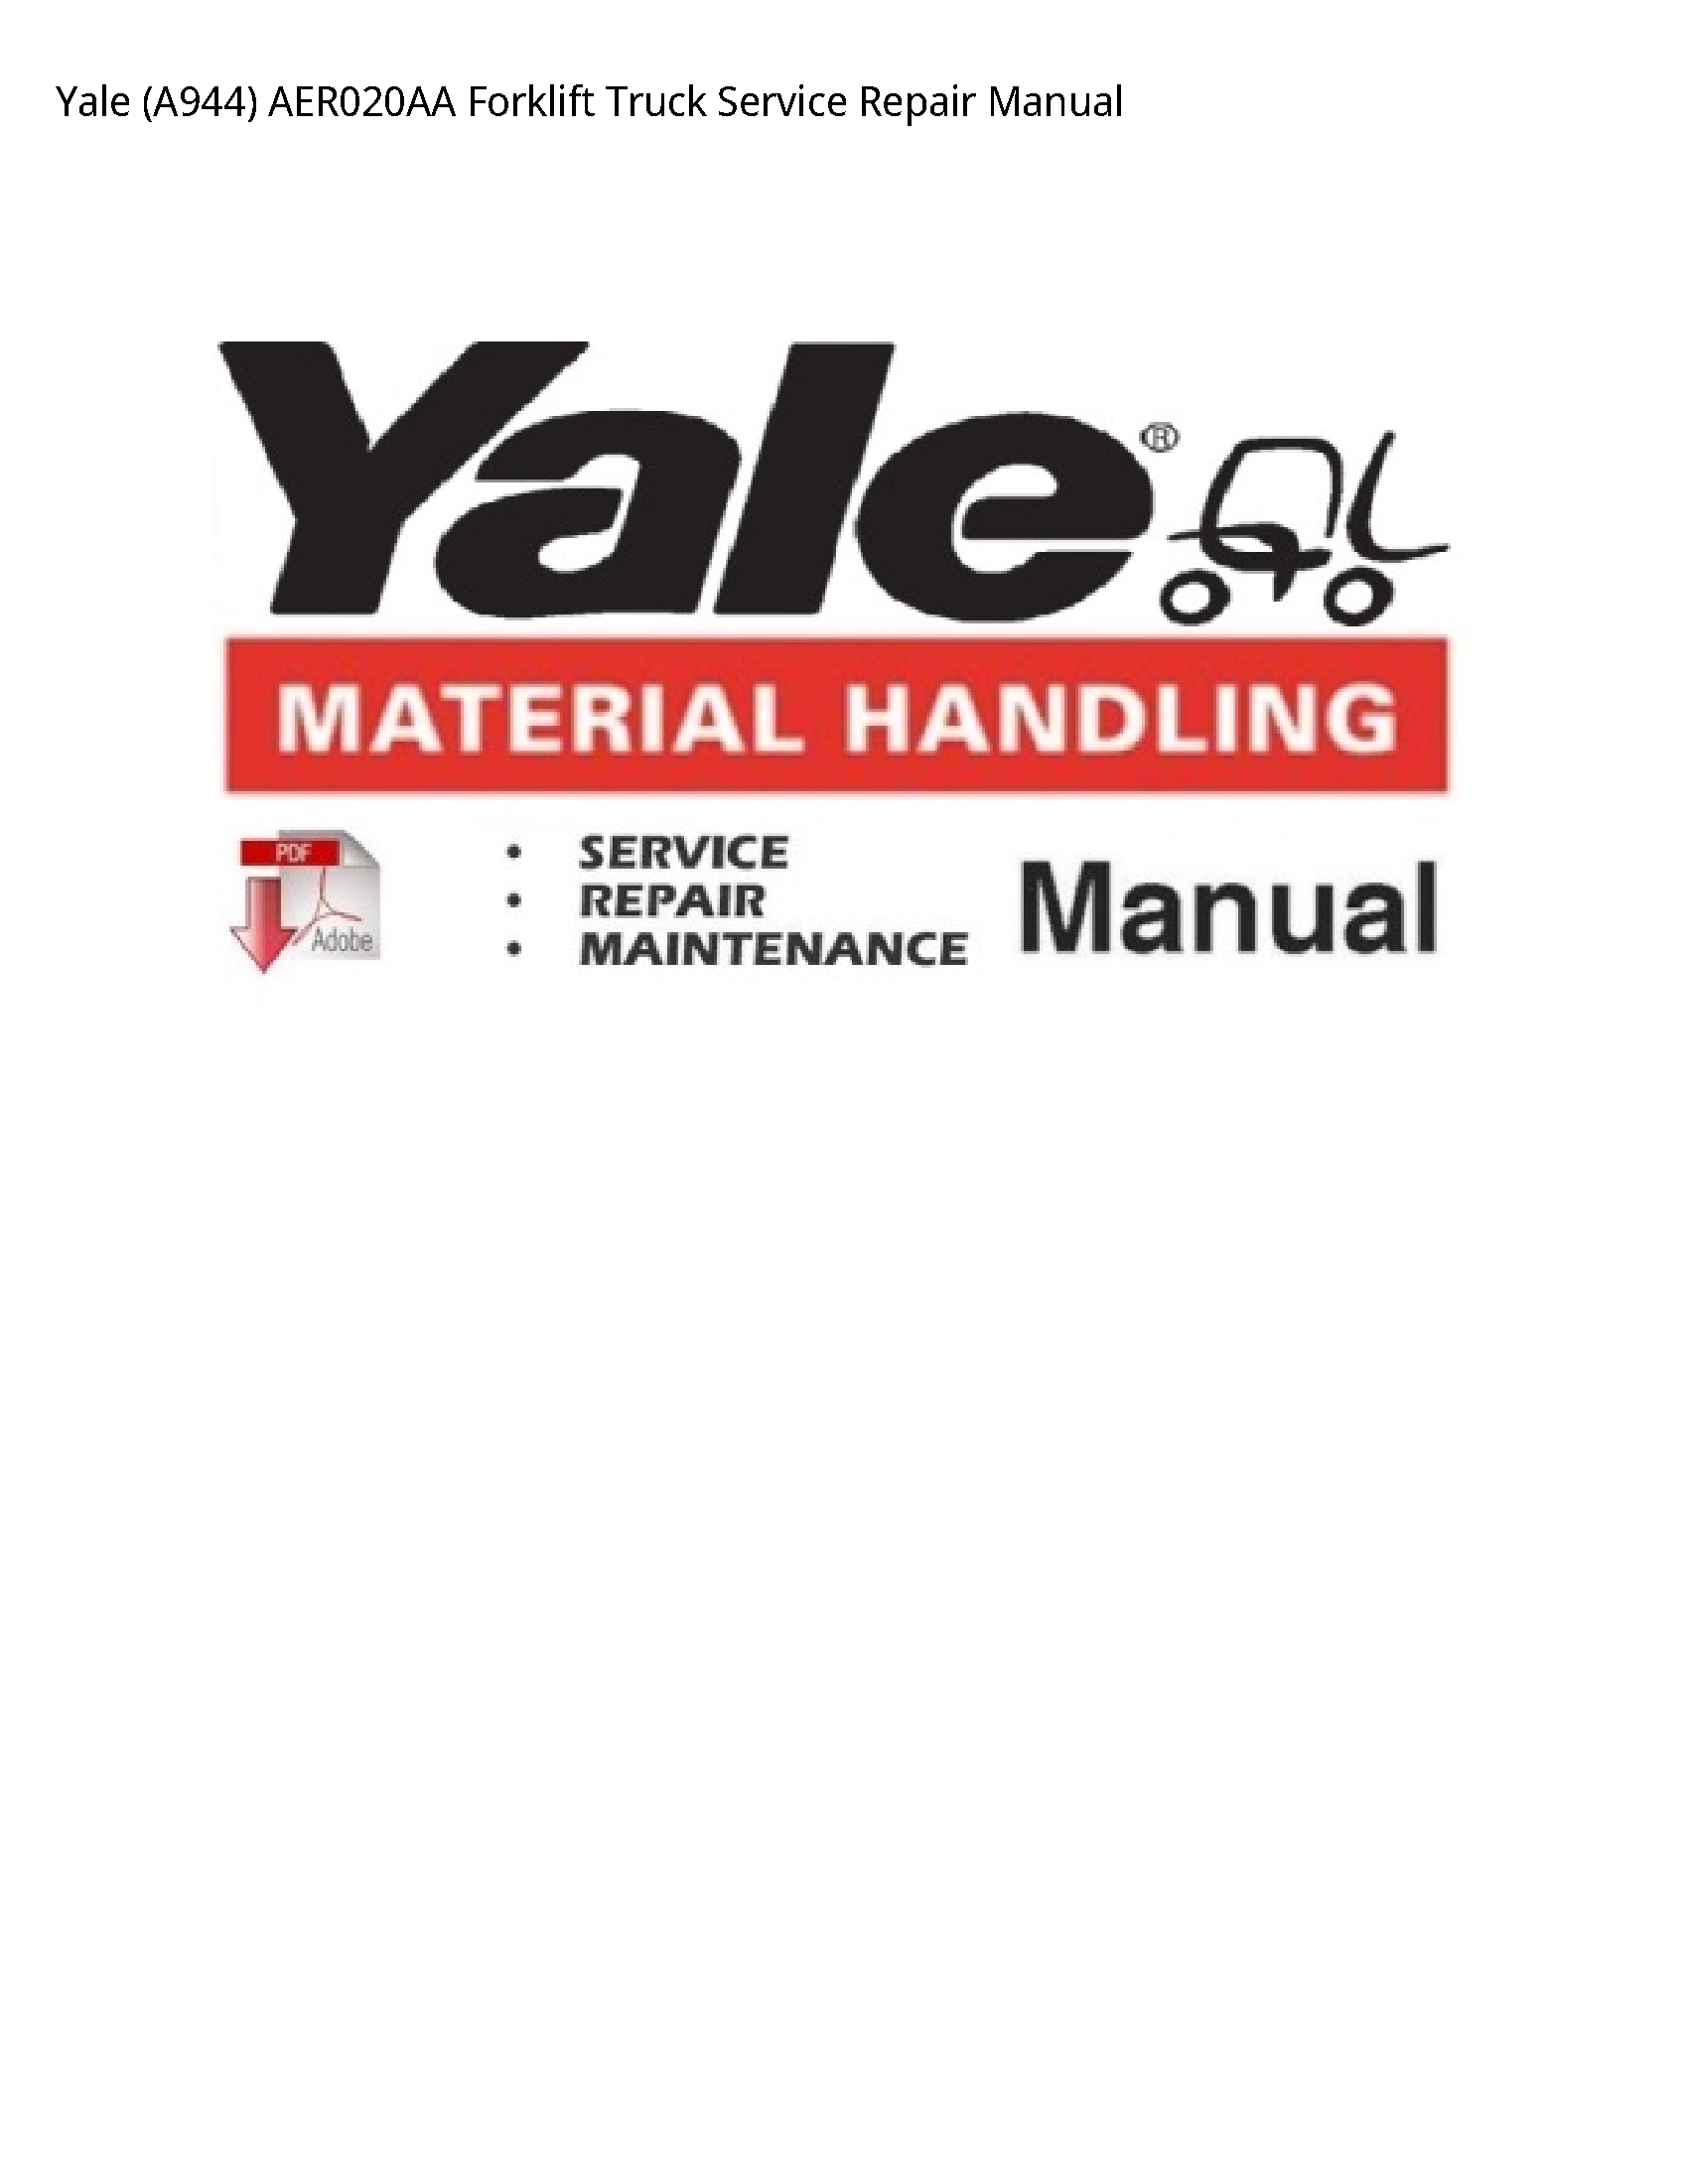 Yale (A944) Forklift Truck manual